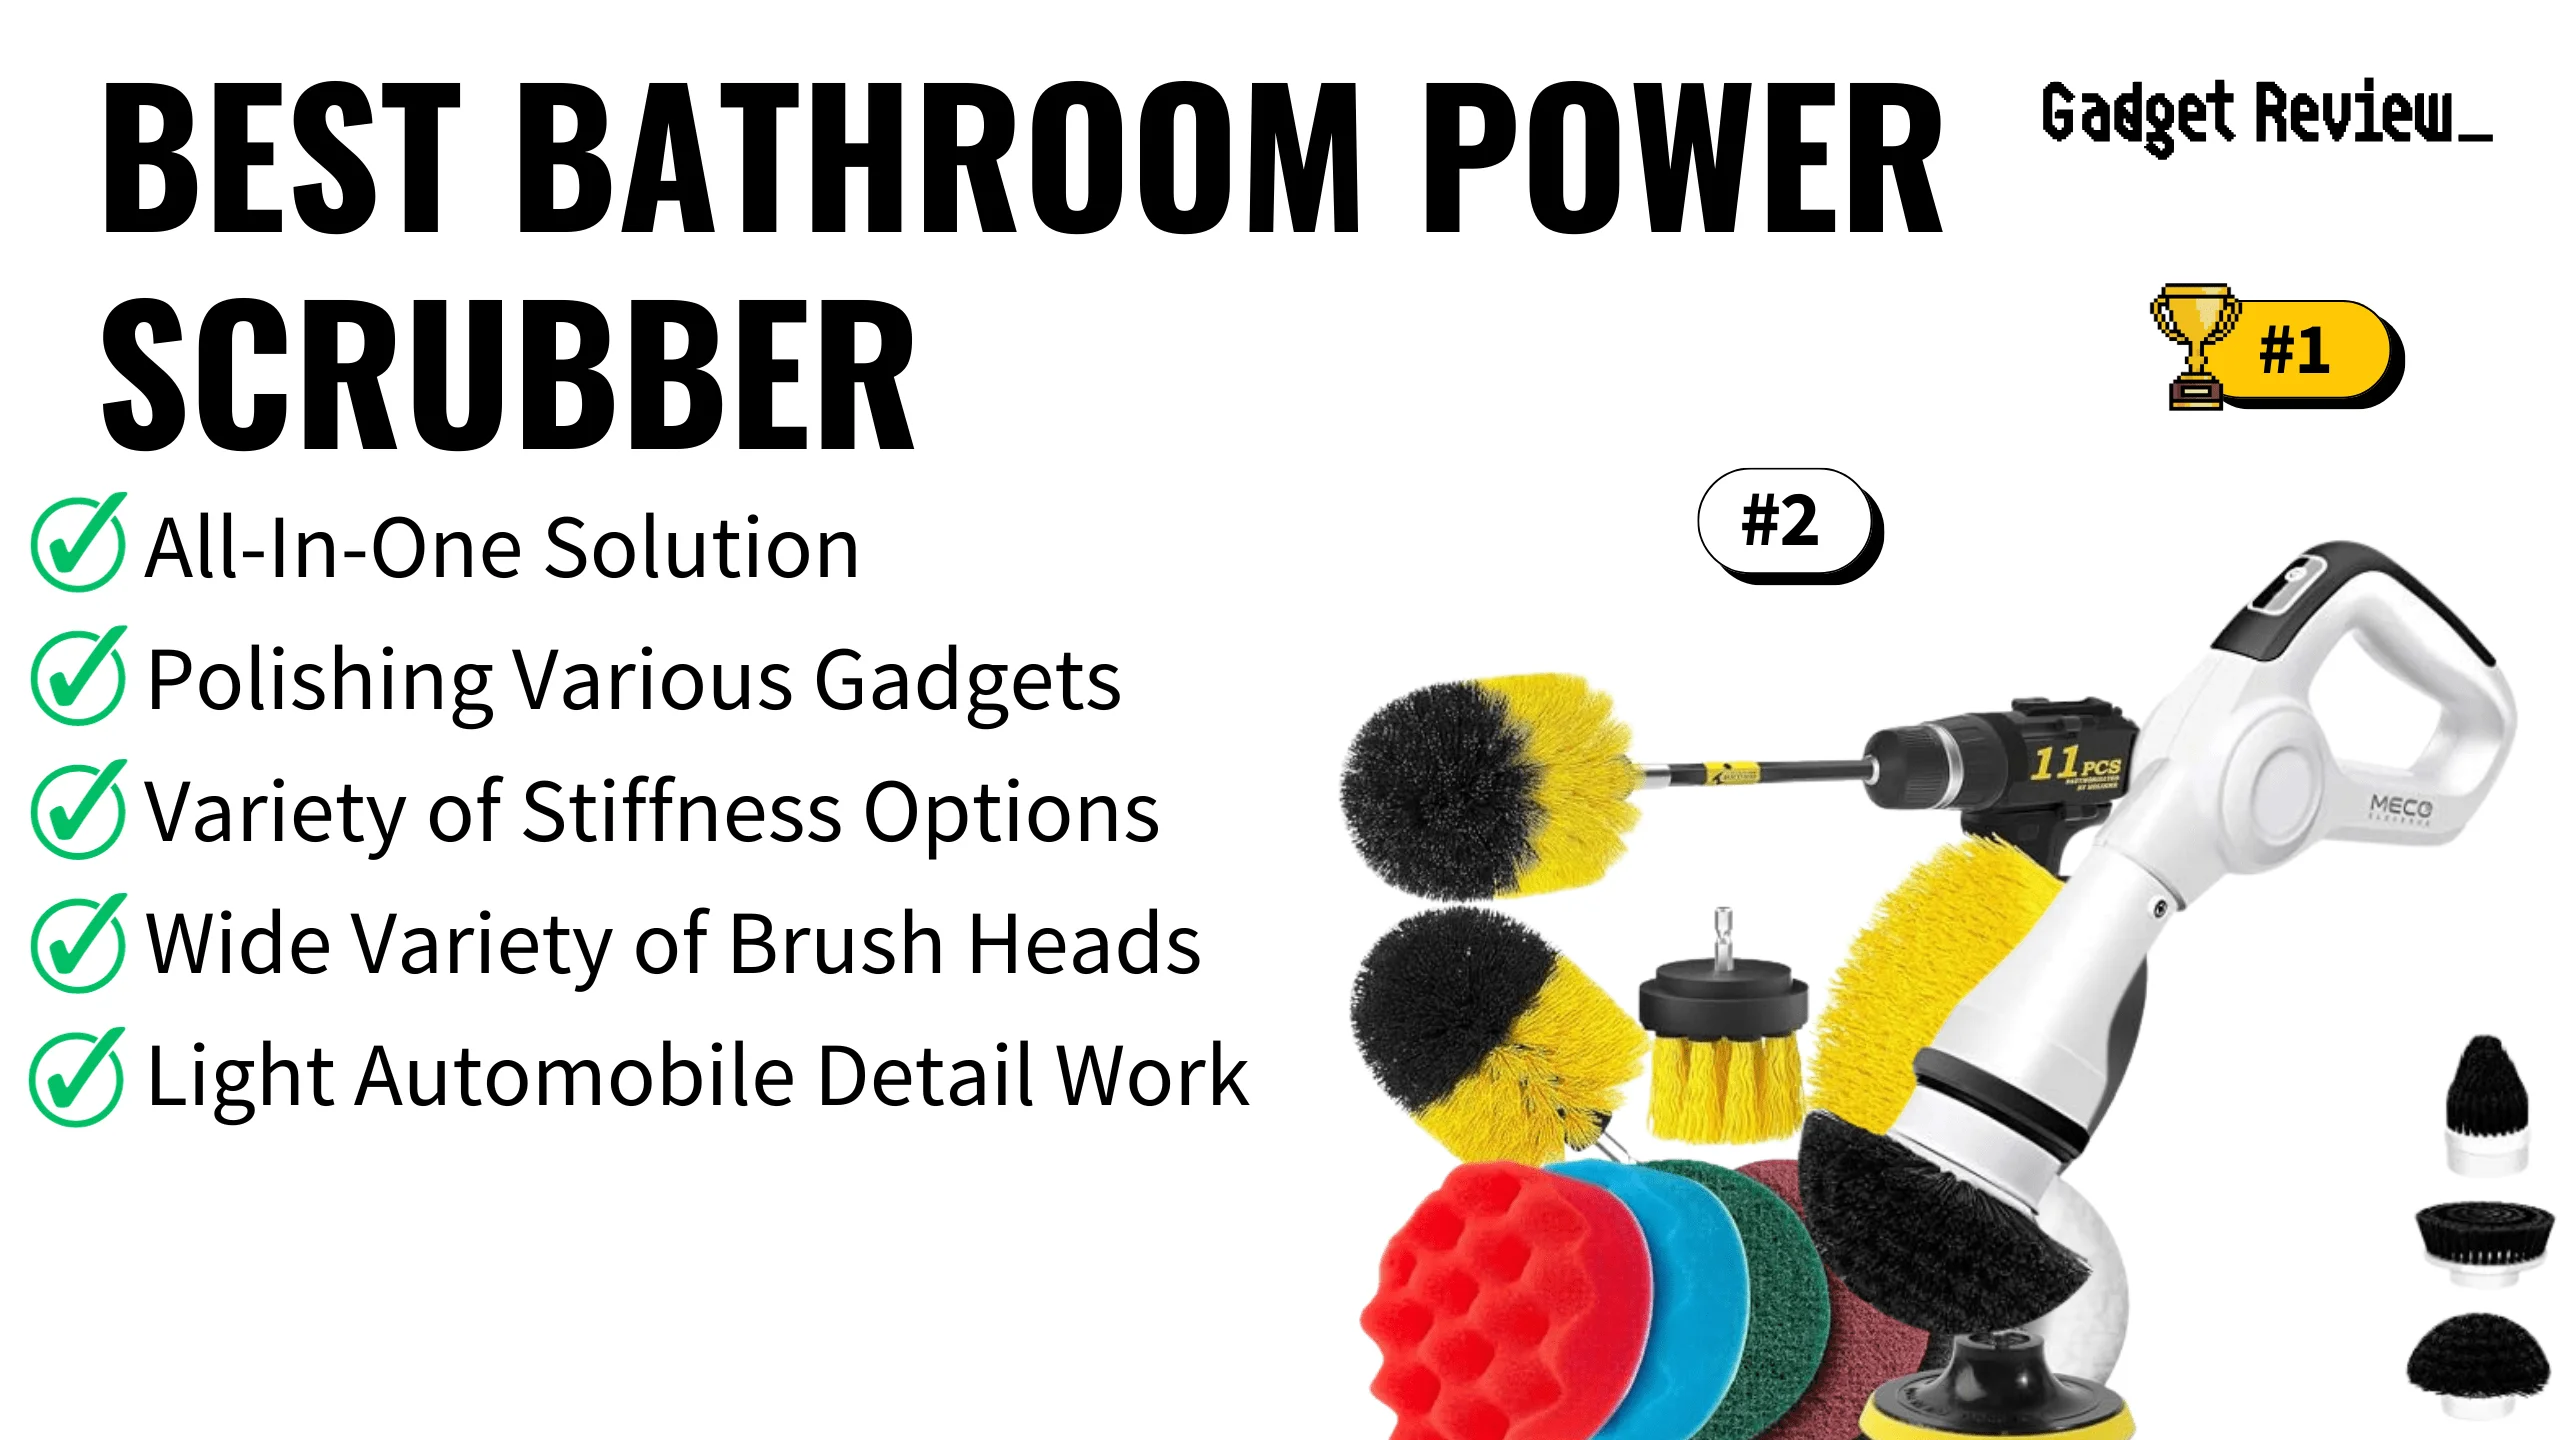 best bathroom power scrubber featured image that shows the top three best bathroom essential models